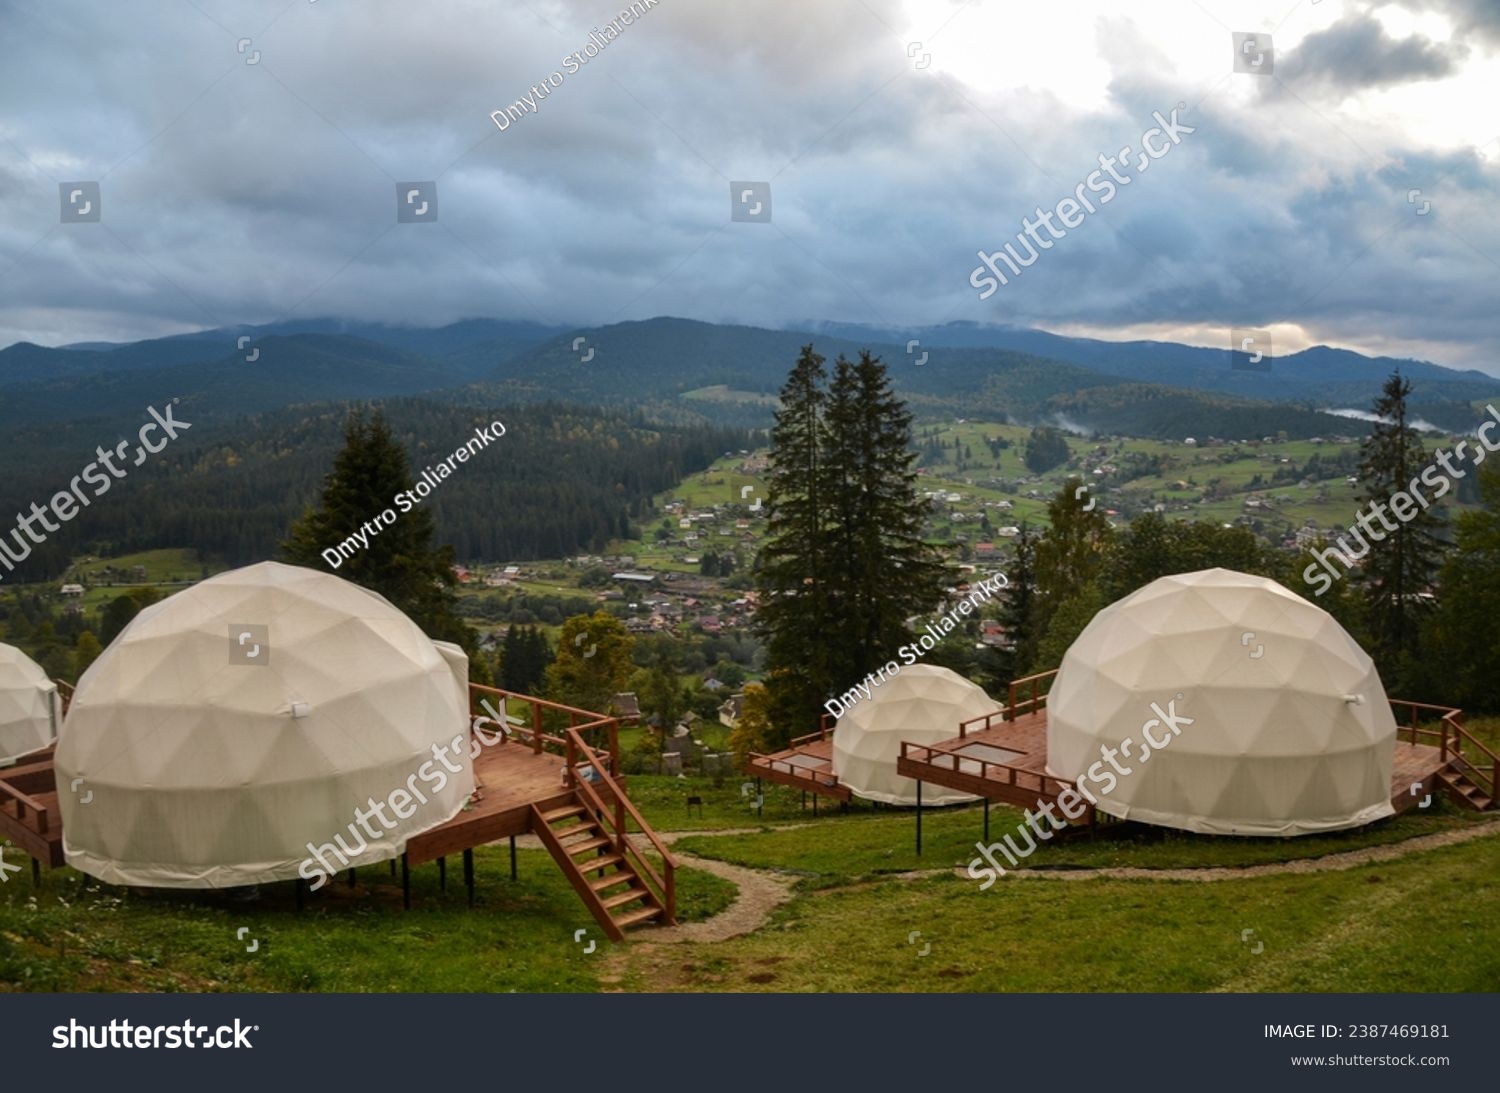 Glamping (glamour camping) is a domed eco-hotel with an incredible view of the surrounding natural panoramas of forested mountains. Glamping is where stunning nature meets modern luxury #2387469181